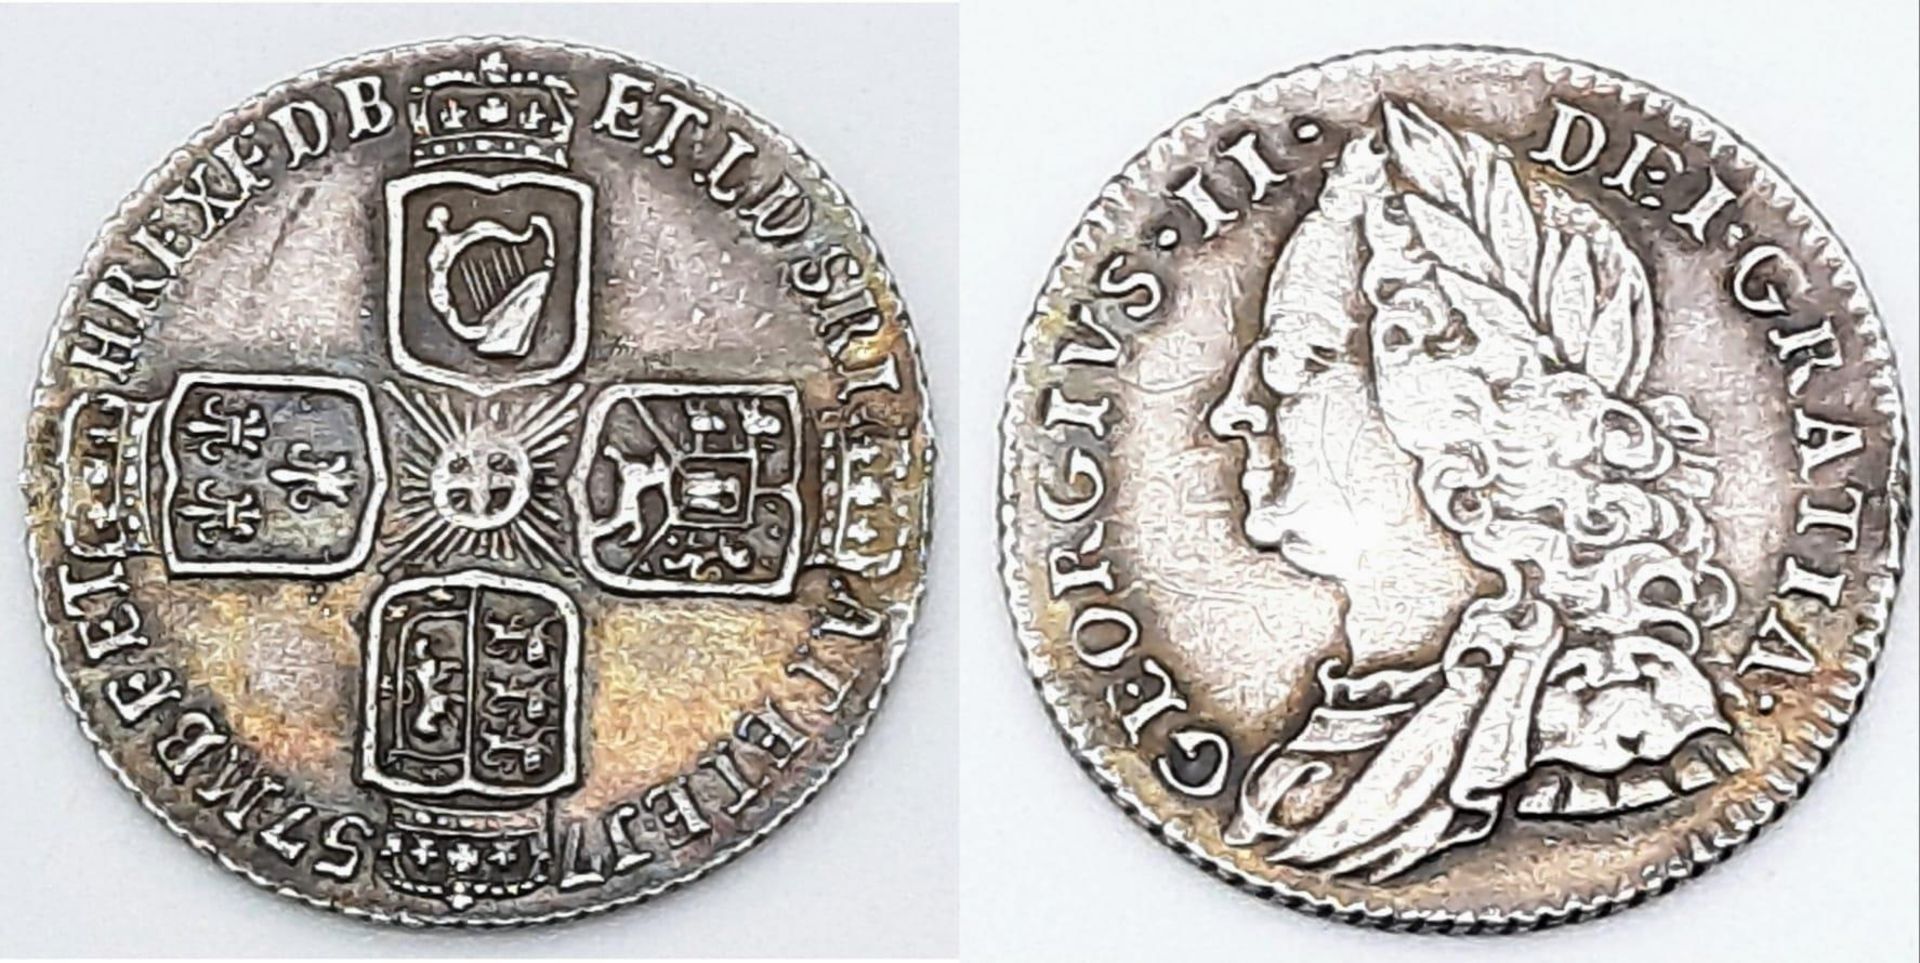 A George II 1757 British Silver Sixpence Coin. Please see photos for conditions.